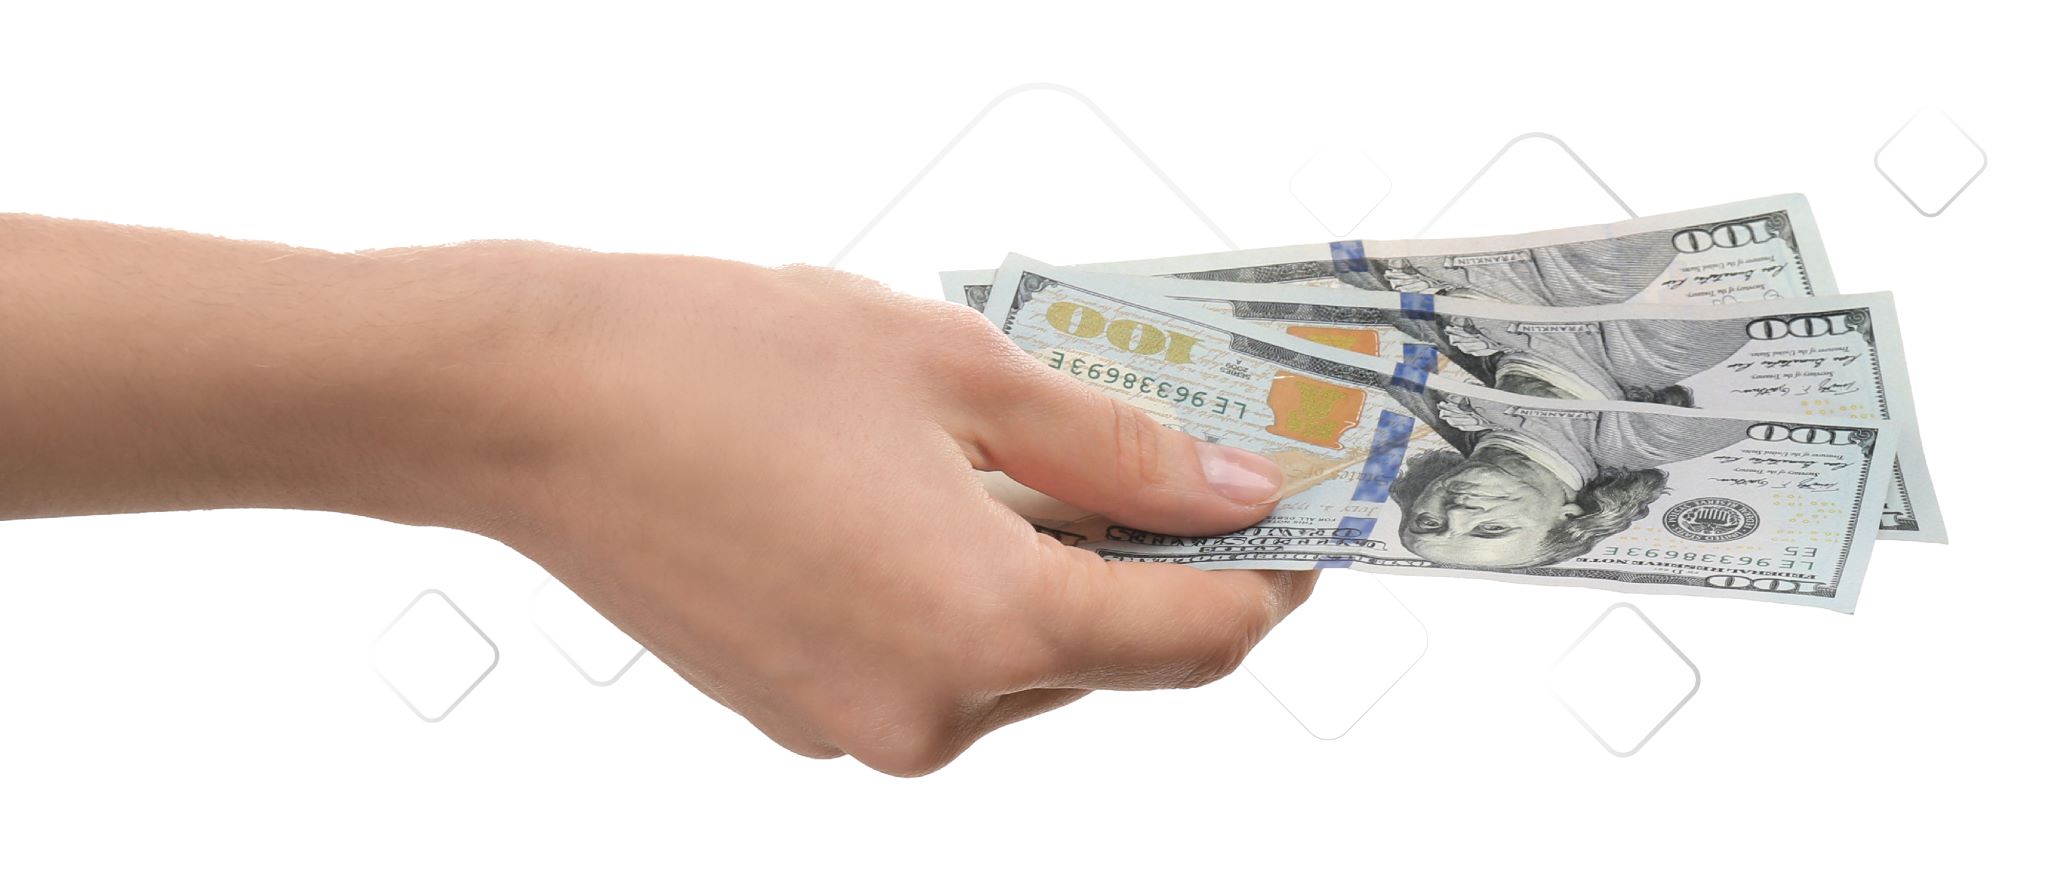 Woman's hand reaching out with three hundred dollars in her right hand reaching to give to someone.